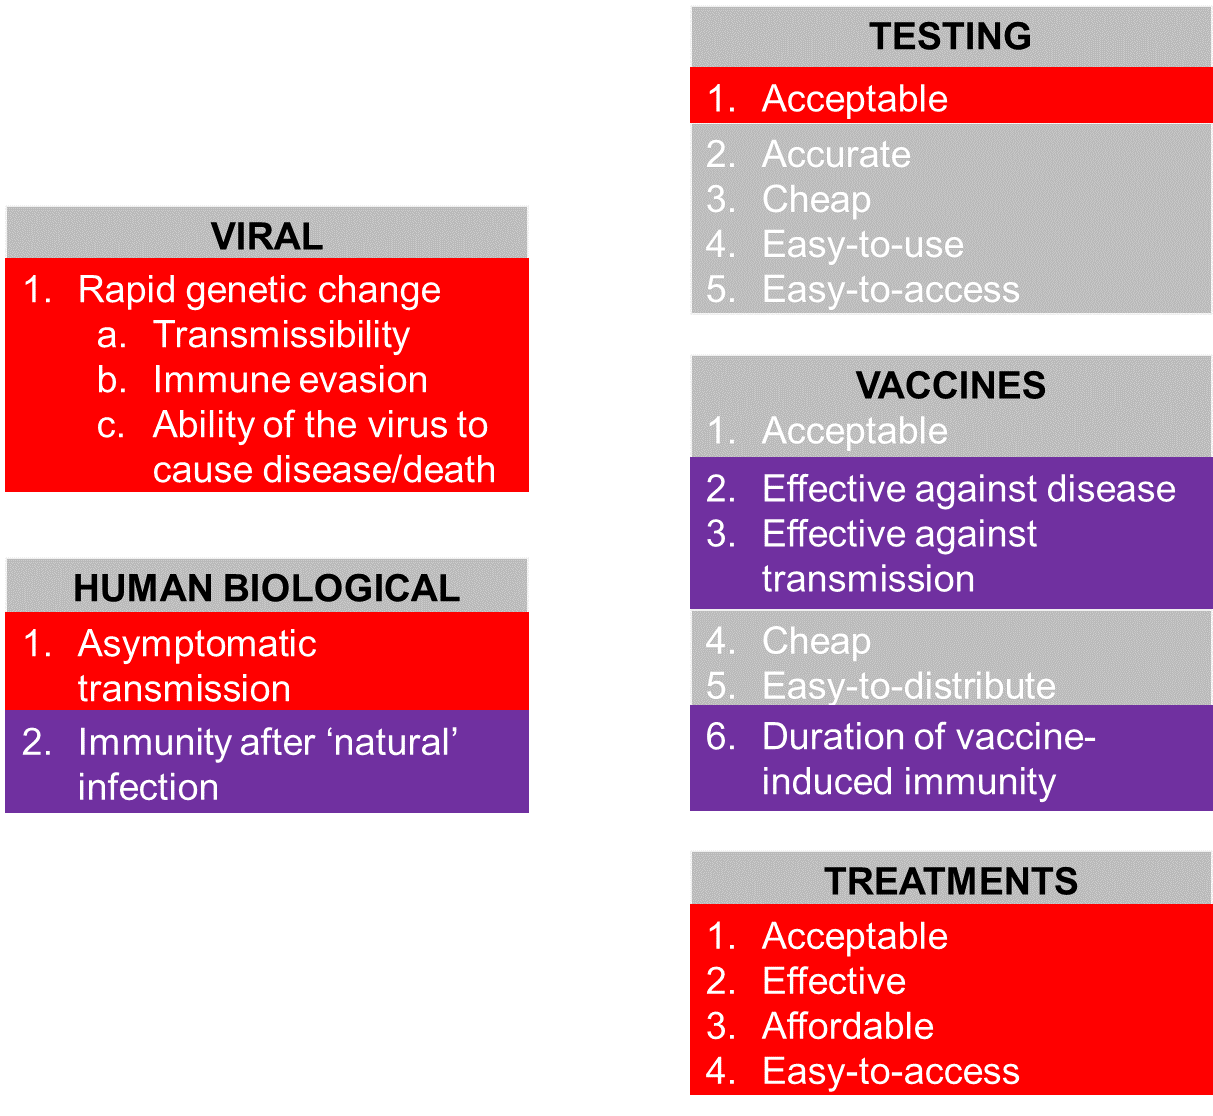 Figure 1 depicts critical factors for the ongoing COVID-19 response. The factors are divided into five categories: viral; human biological; testing; vaccines; treatments. Factors of concern include rapid genetic change; asymptomatic transmission; acceptability of testing; treatments that are acceptable; effective; affordable and easy-to-access. Factors of uncertainty include immunity after natural infection; whether vaccines are effective against the disease and transmissions and the duration of vaccine-induced immunity. Known factors that are not of concern include whether testing is accessible, cheap, easy-to-use and easy-to-access; and whether vaccines are acceptable, cheap and easy-to-distribute.